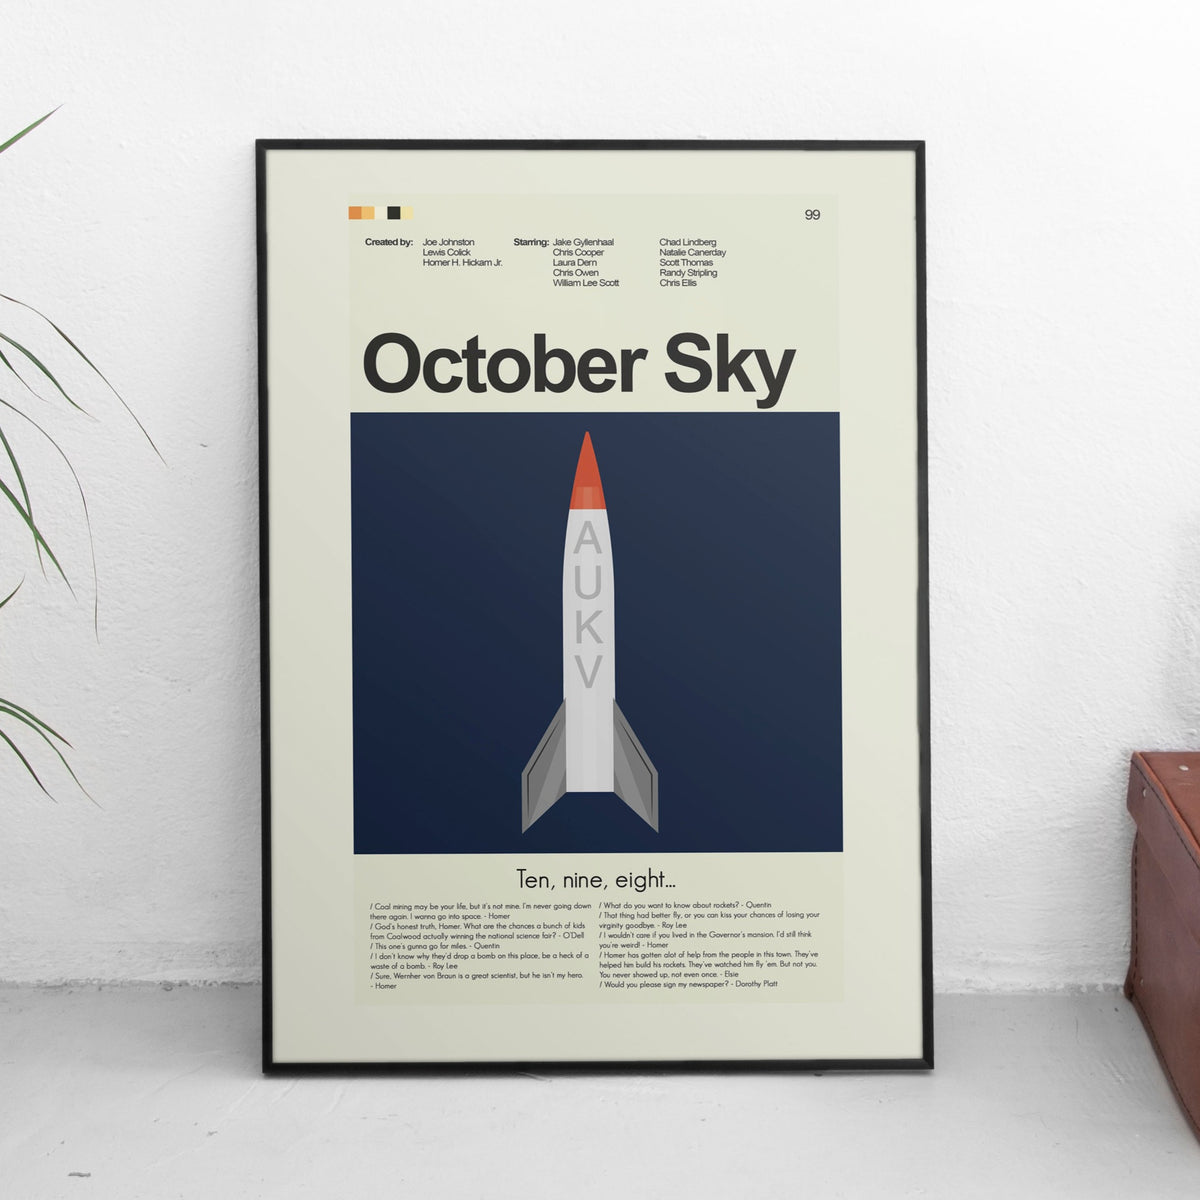 October Sky - AUK V | 12"x18" or 18"x24" Print only